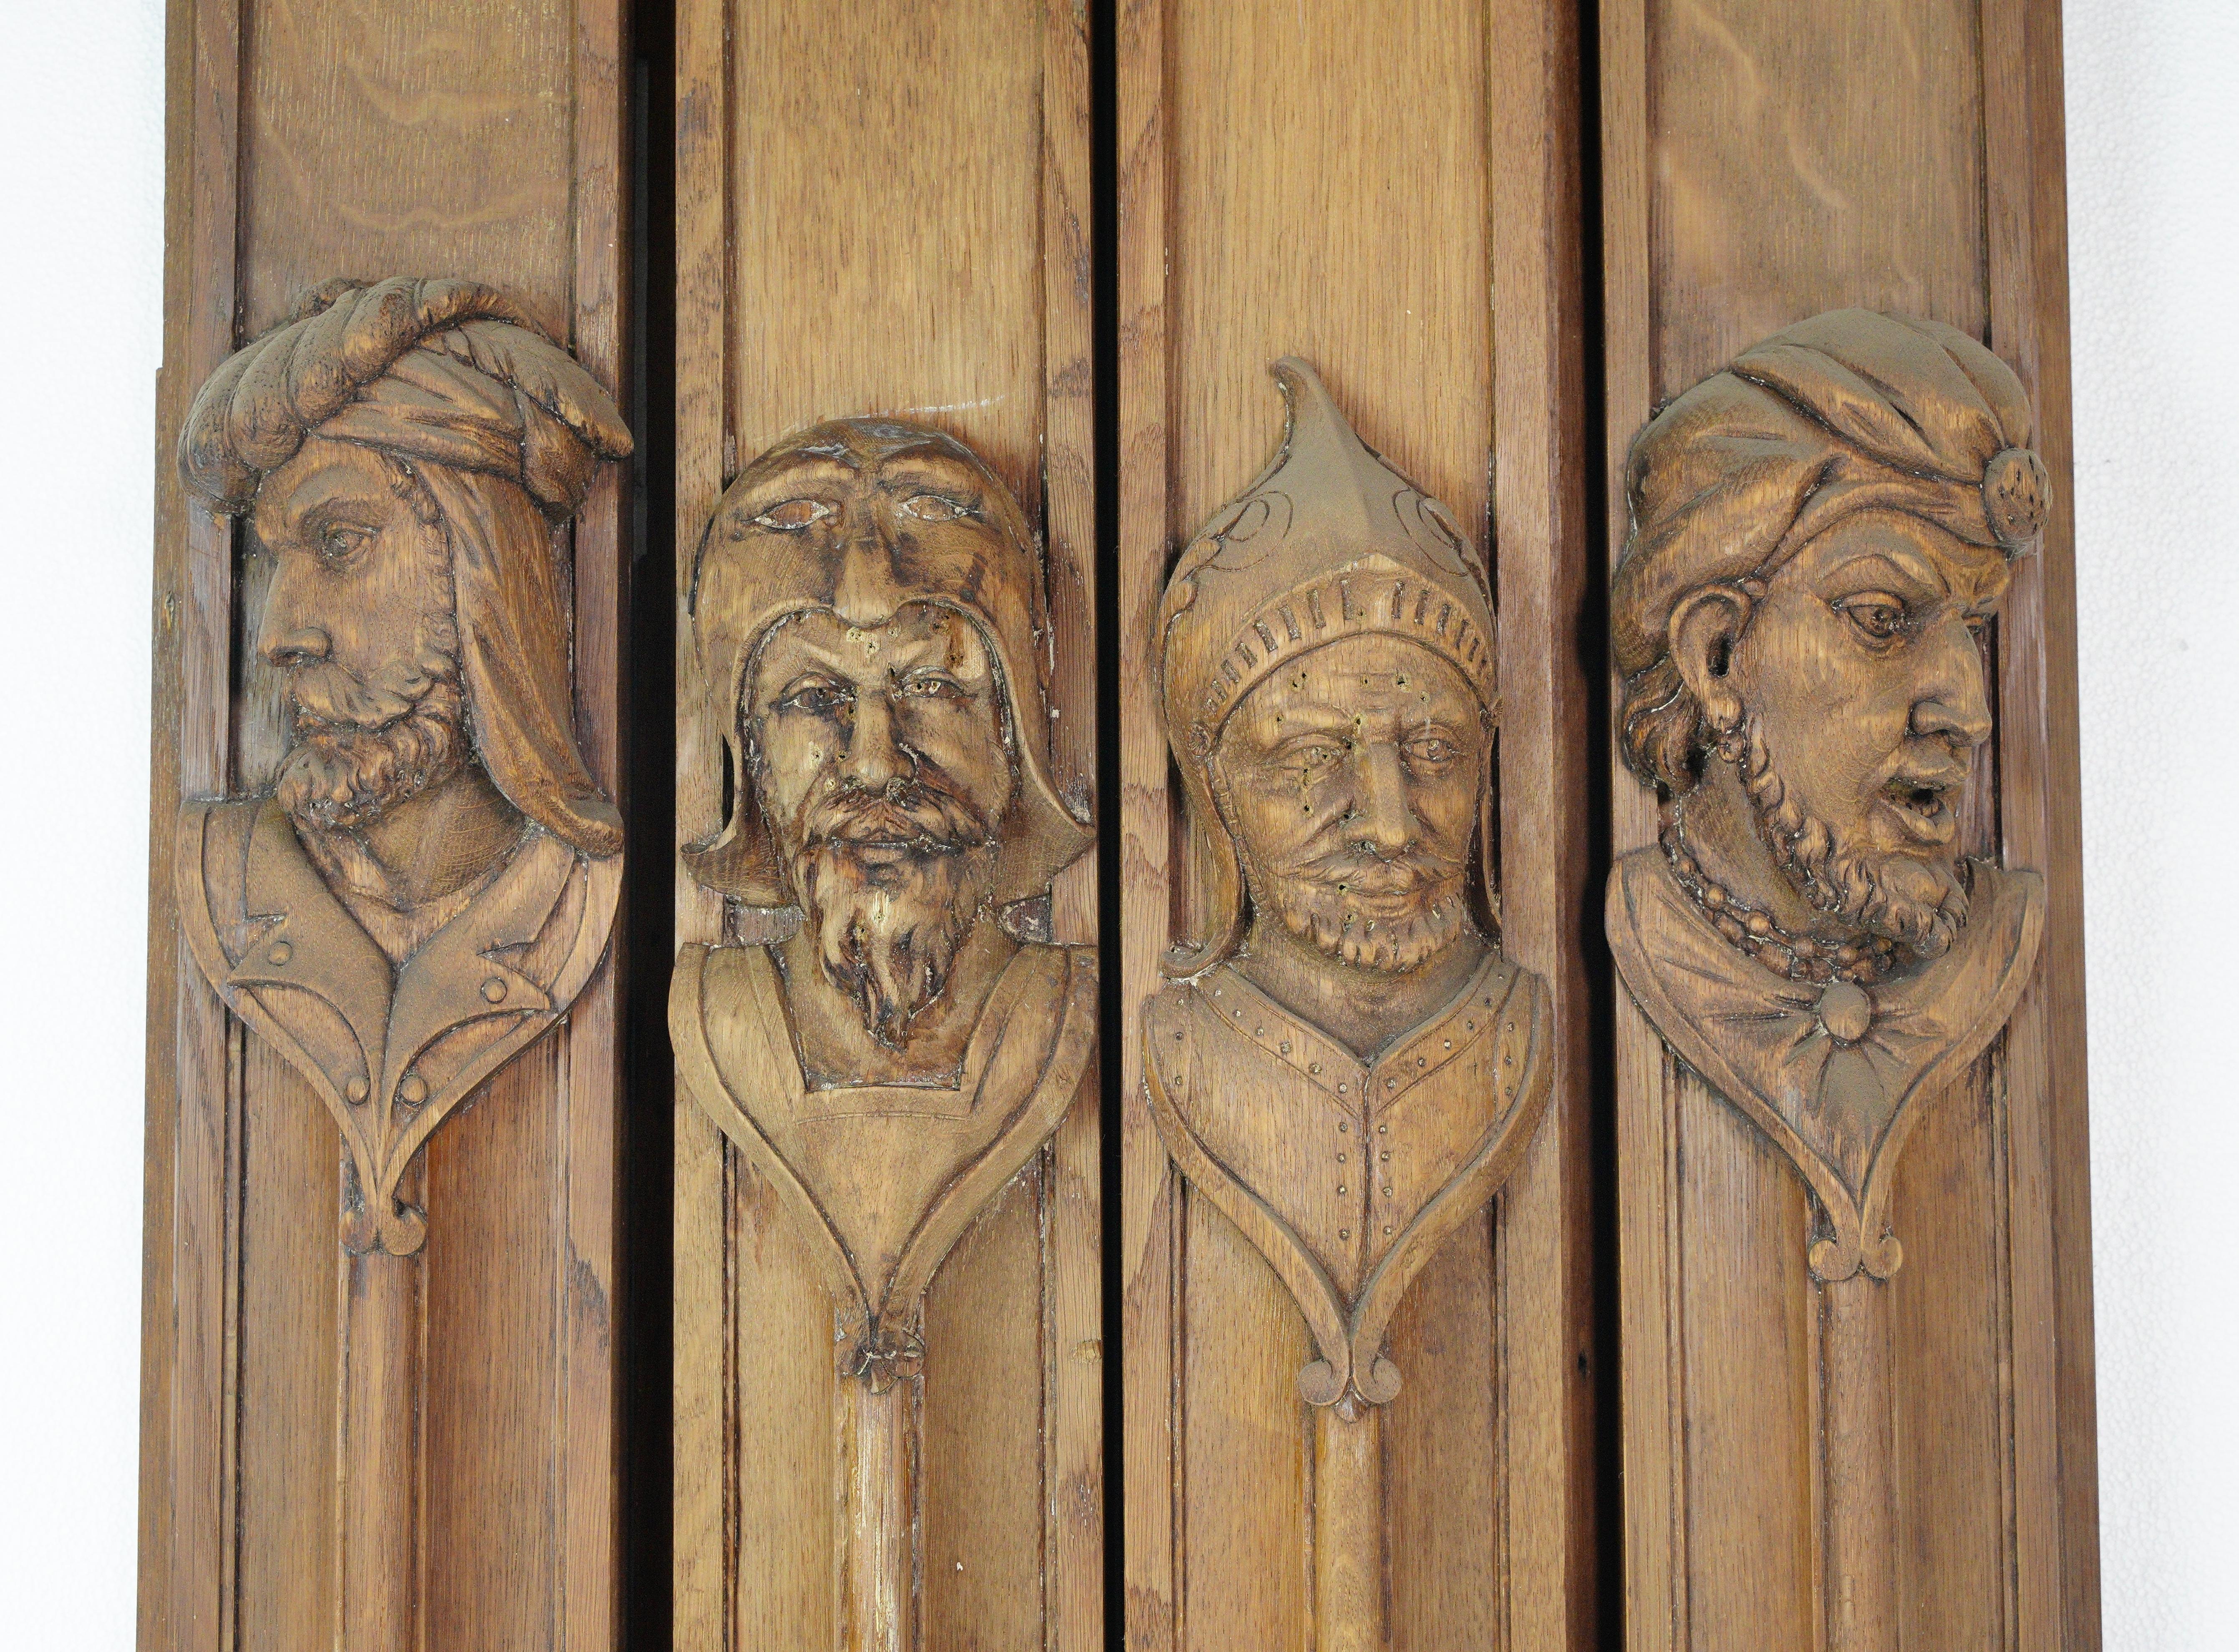 Decorate with a touch of medieval charm with this set of antique solid chestnut door pilasters featuring intricate hand carved faces. These architectural masterpieces add historical character and elegance to any entryway or interior space. They are